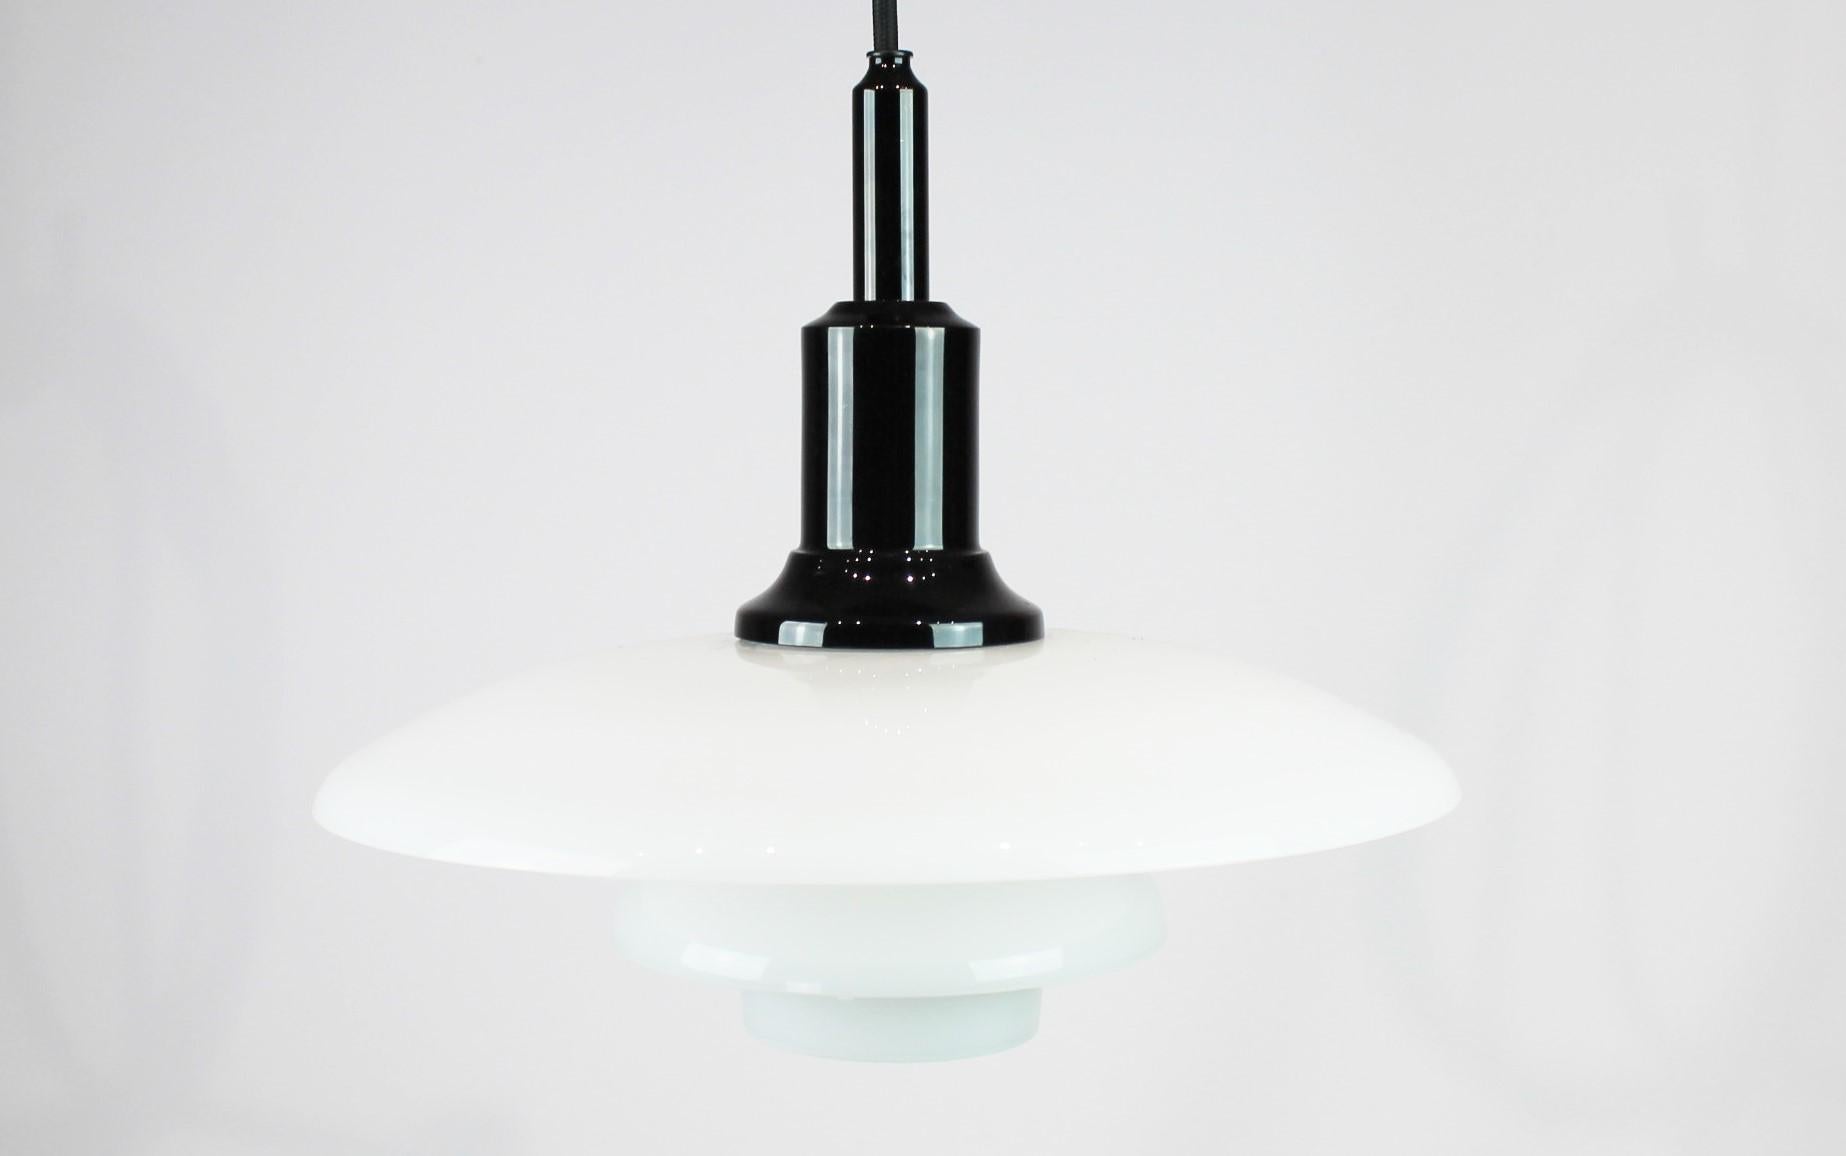 PH 3/2 pendant designed by Poul Henningsen and manufactured by Louis Poulsen. The lamp is of white opaline glass and black chromed.